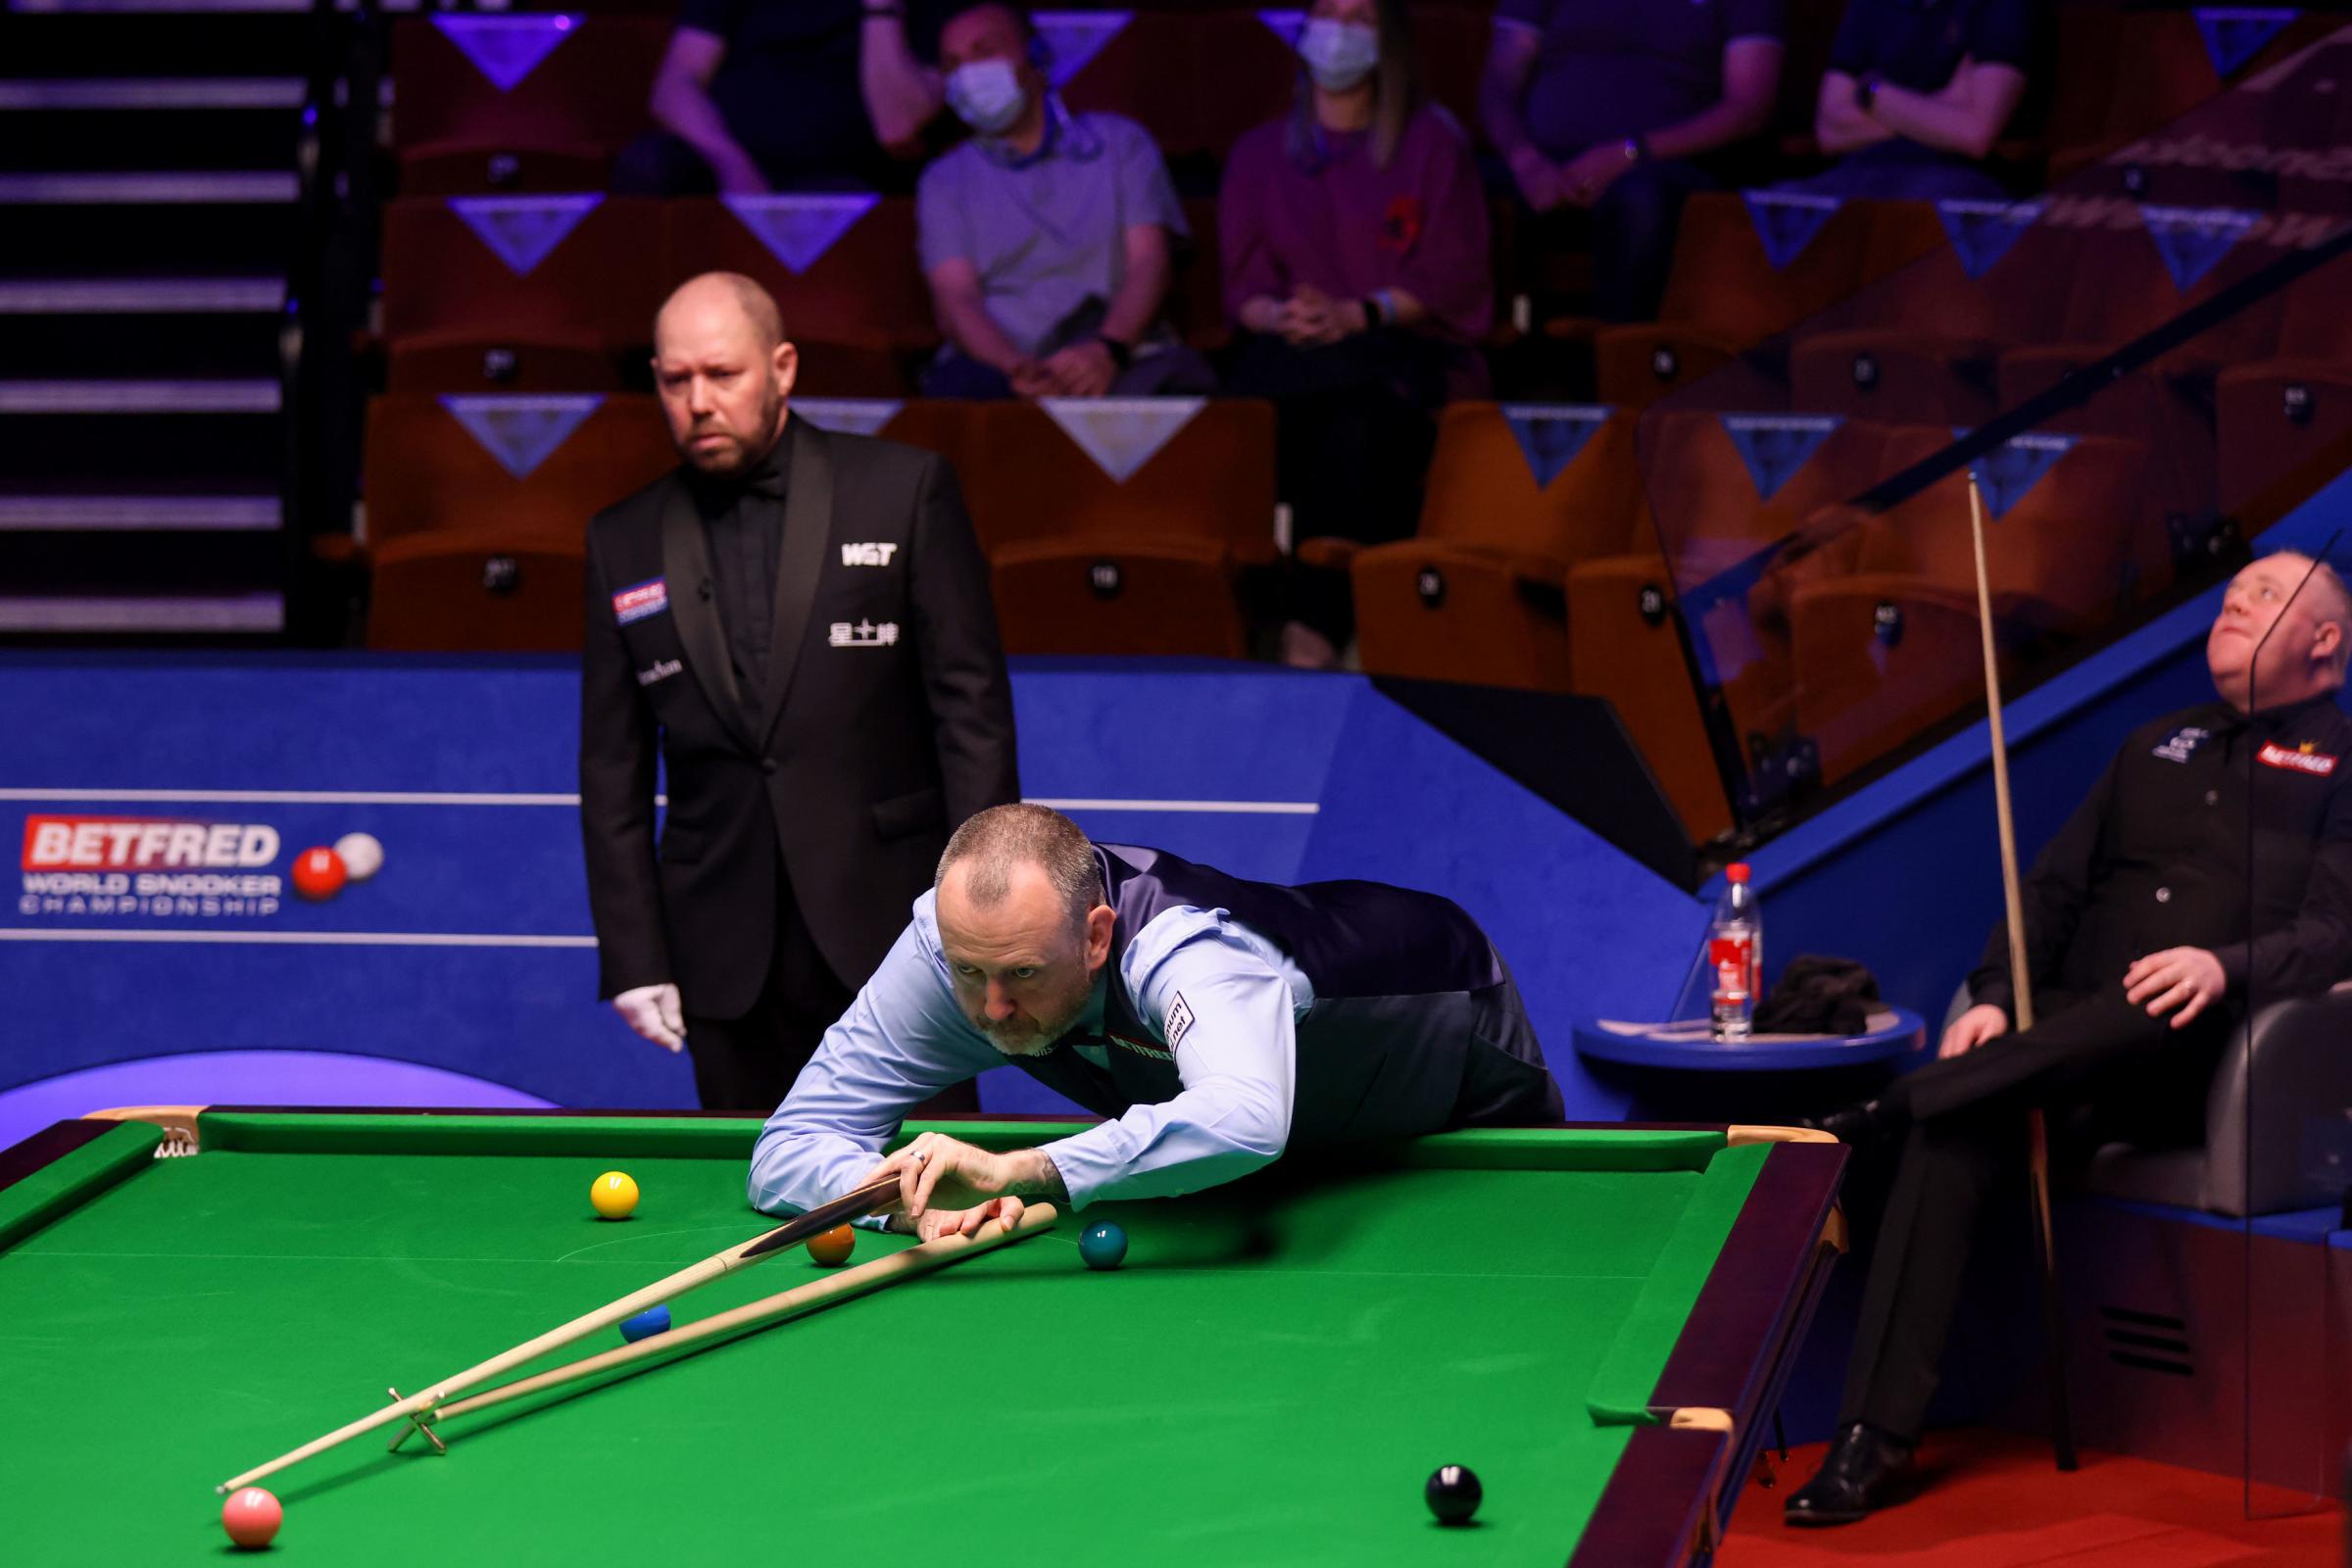 Mark Williams during his match with John Higgins during day eight of the Betfred World Snooker Championships 2021 at The Crucible, Sheffield. Picture date: Saturday April 24, 2021. PA Photo. See PA story SNOOKER World. Photo credit should read: George